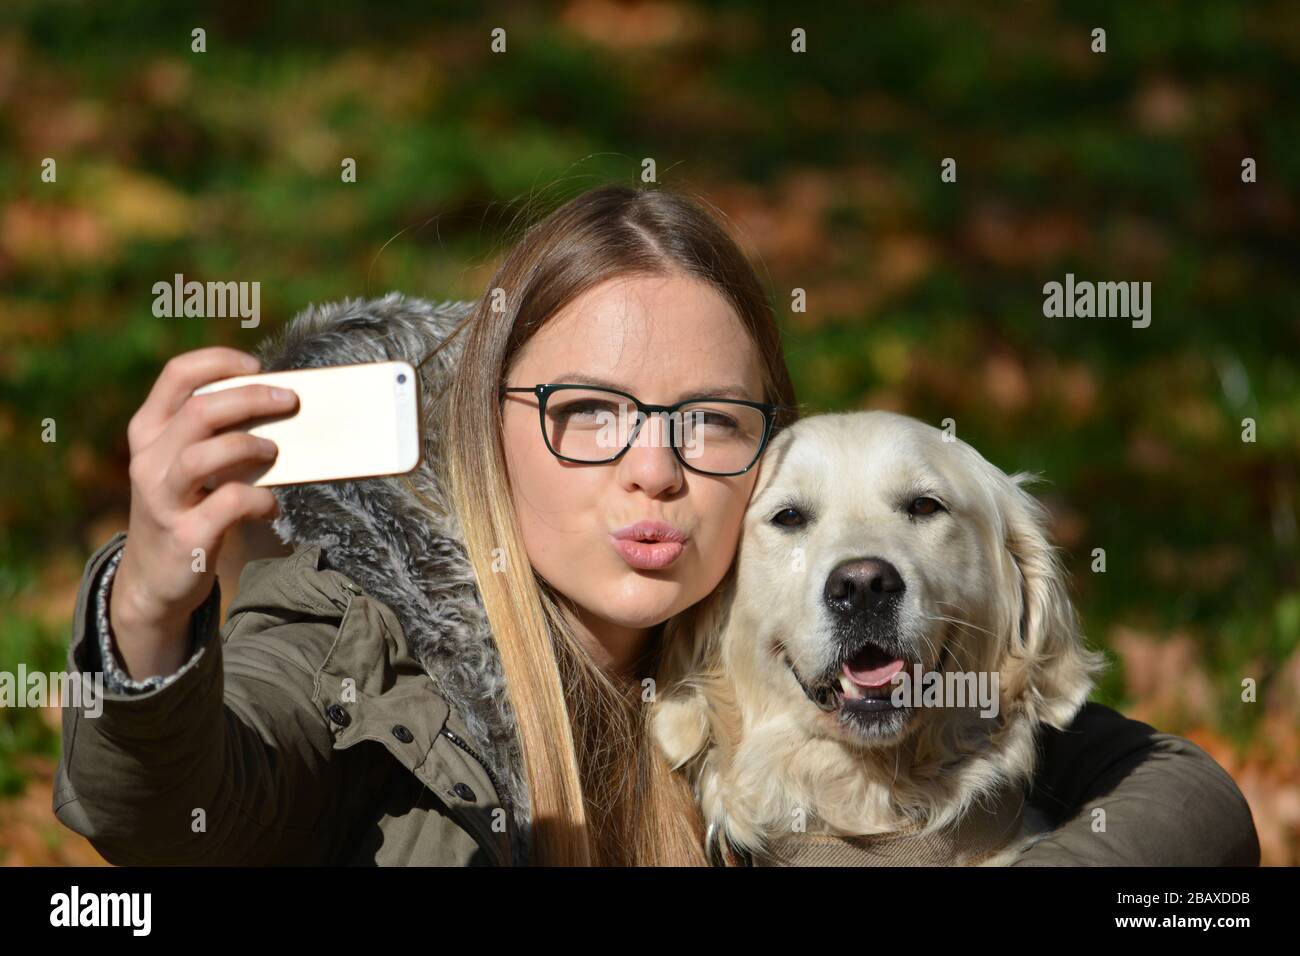 Young girl with spectacles posing and taking selfie with her golden retriever dog Stock Photo